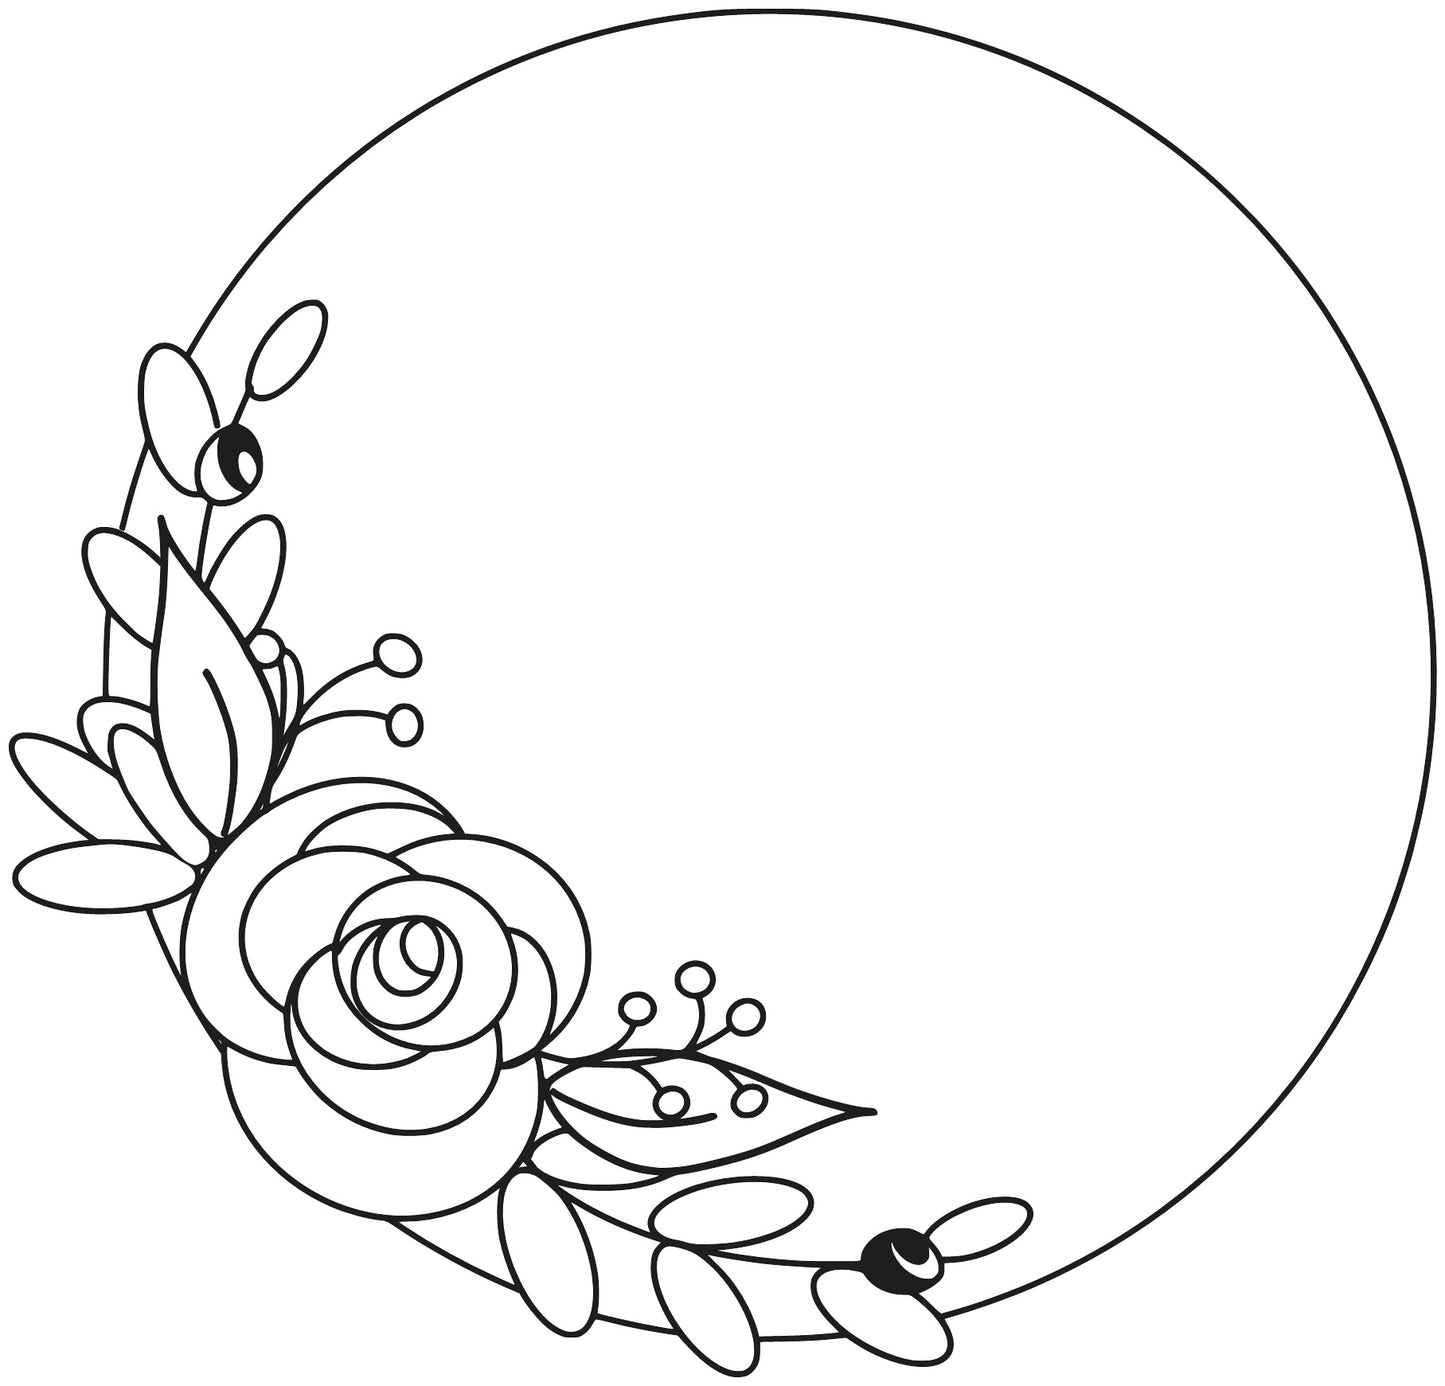 Paint by line- Floral circle